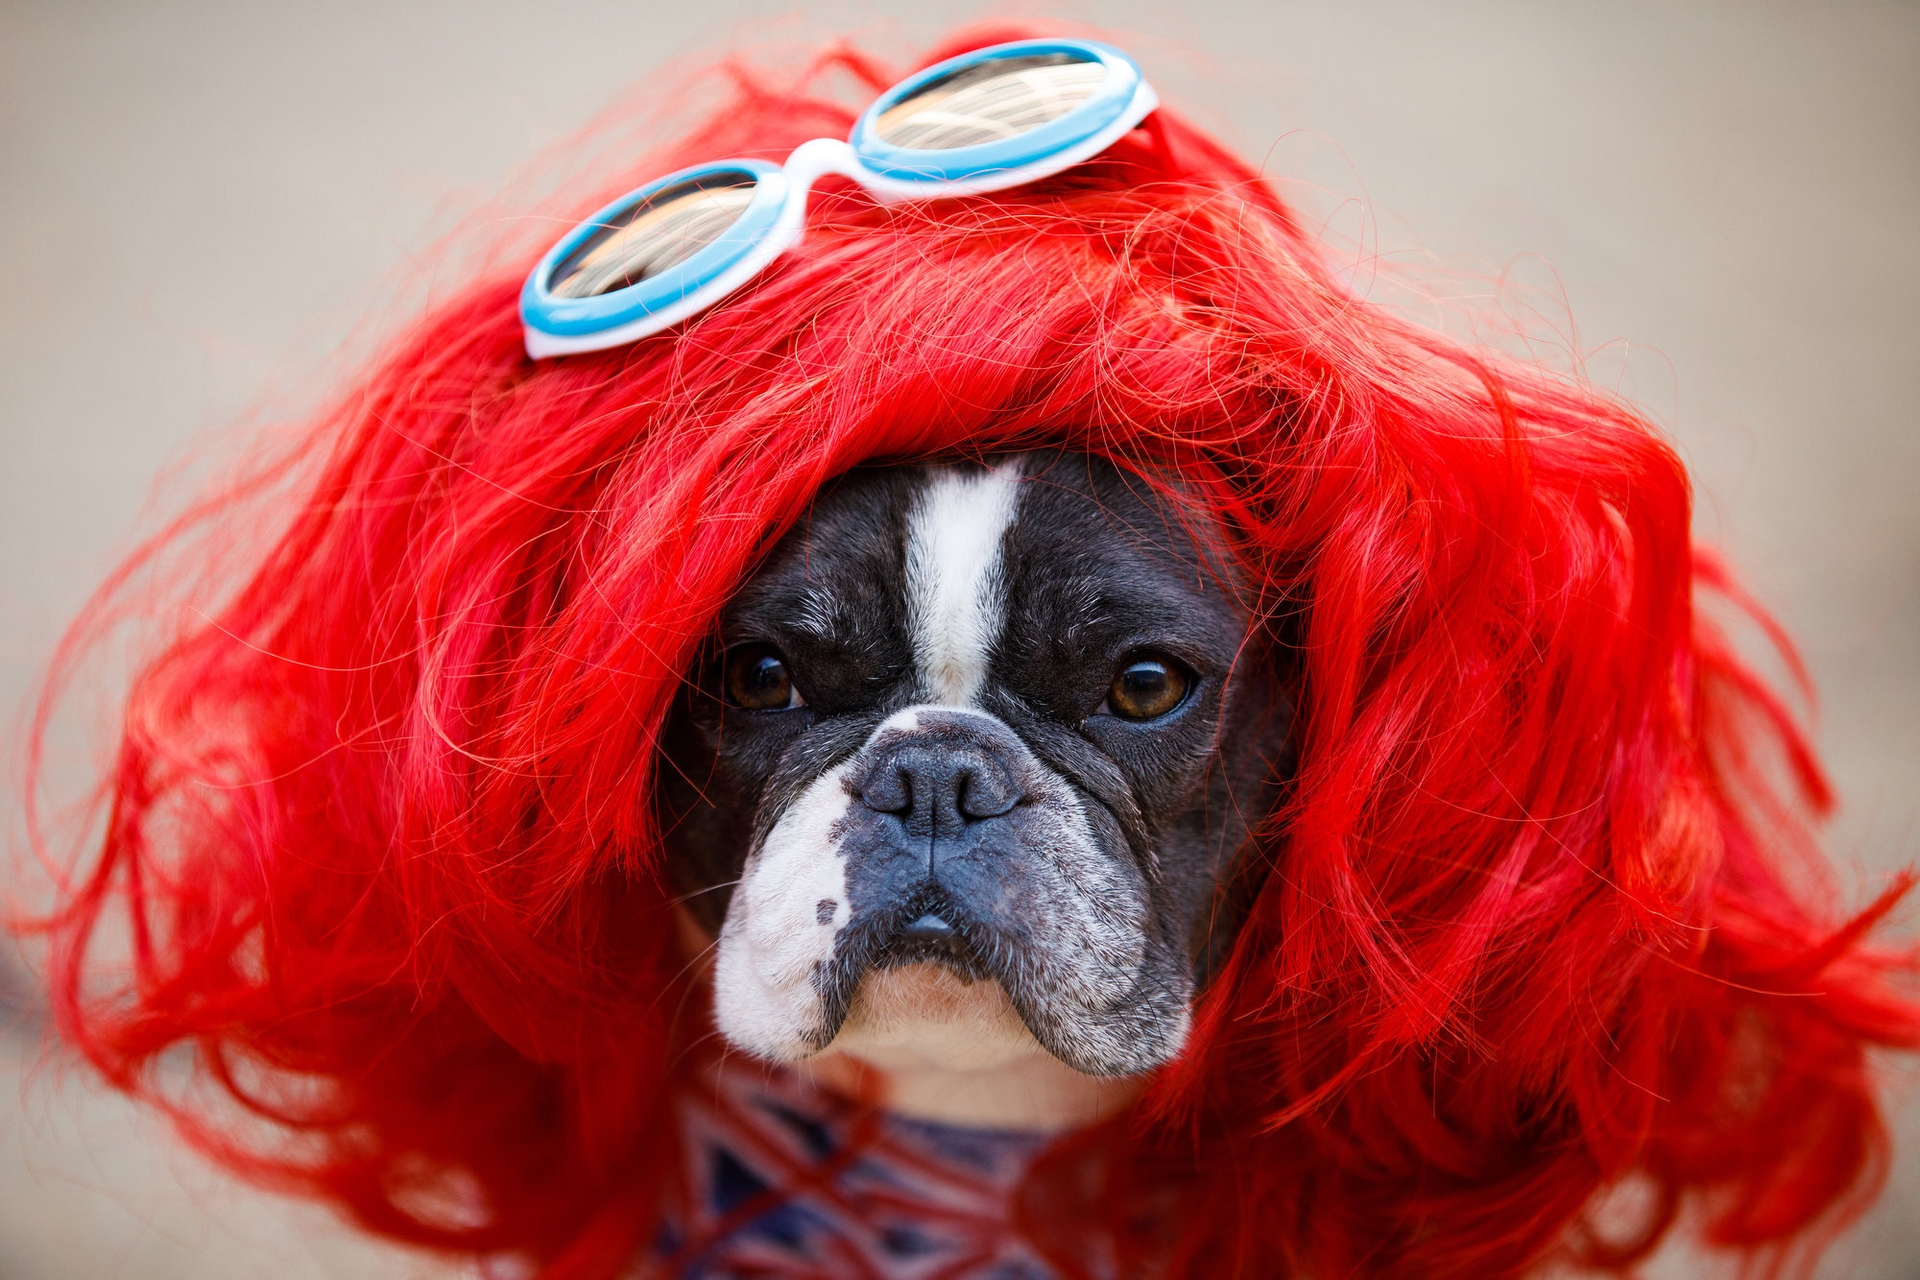 A black and white dog stares into the camera. The dog is dressed for Halloween at Amazon, and is wearing a red wig and blue eye glasses on his head. 